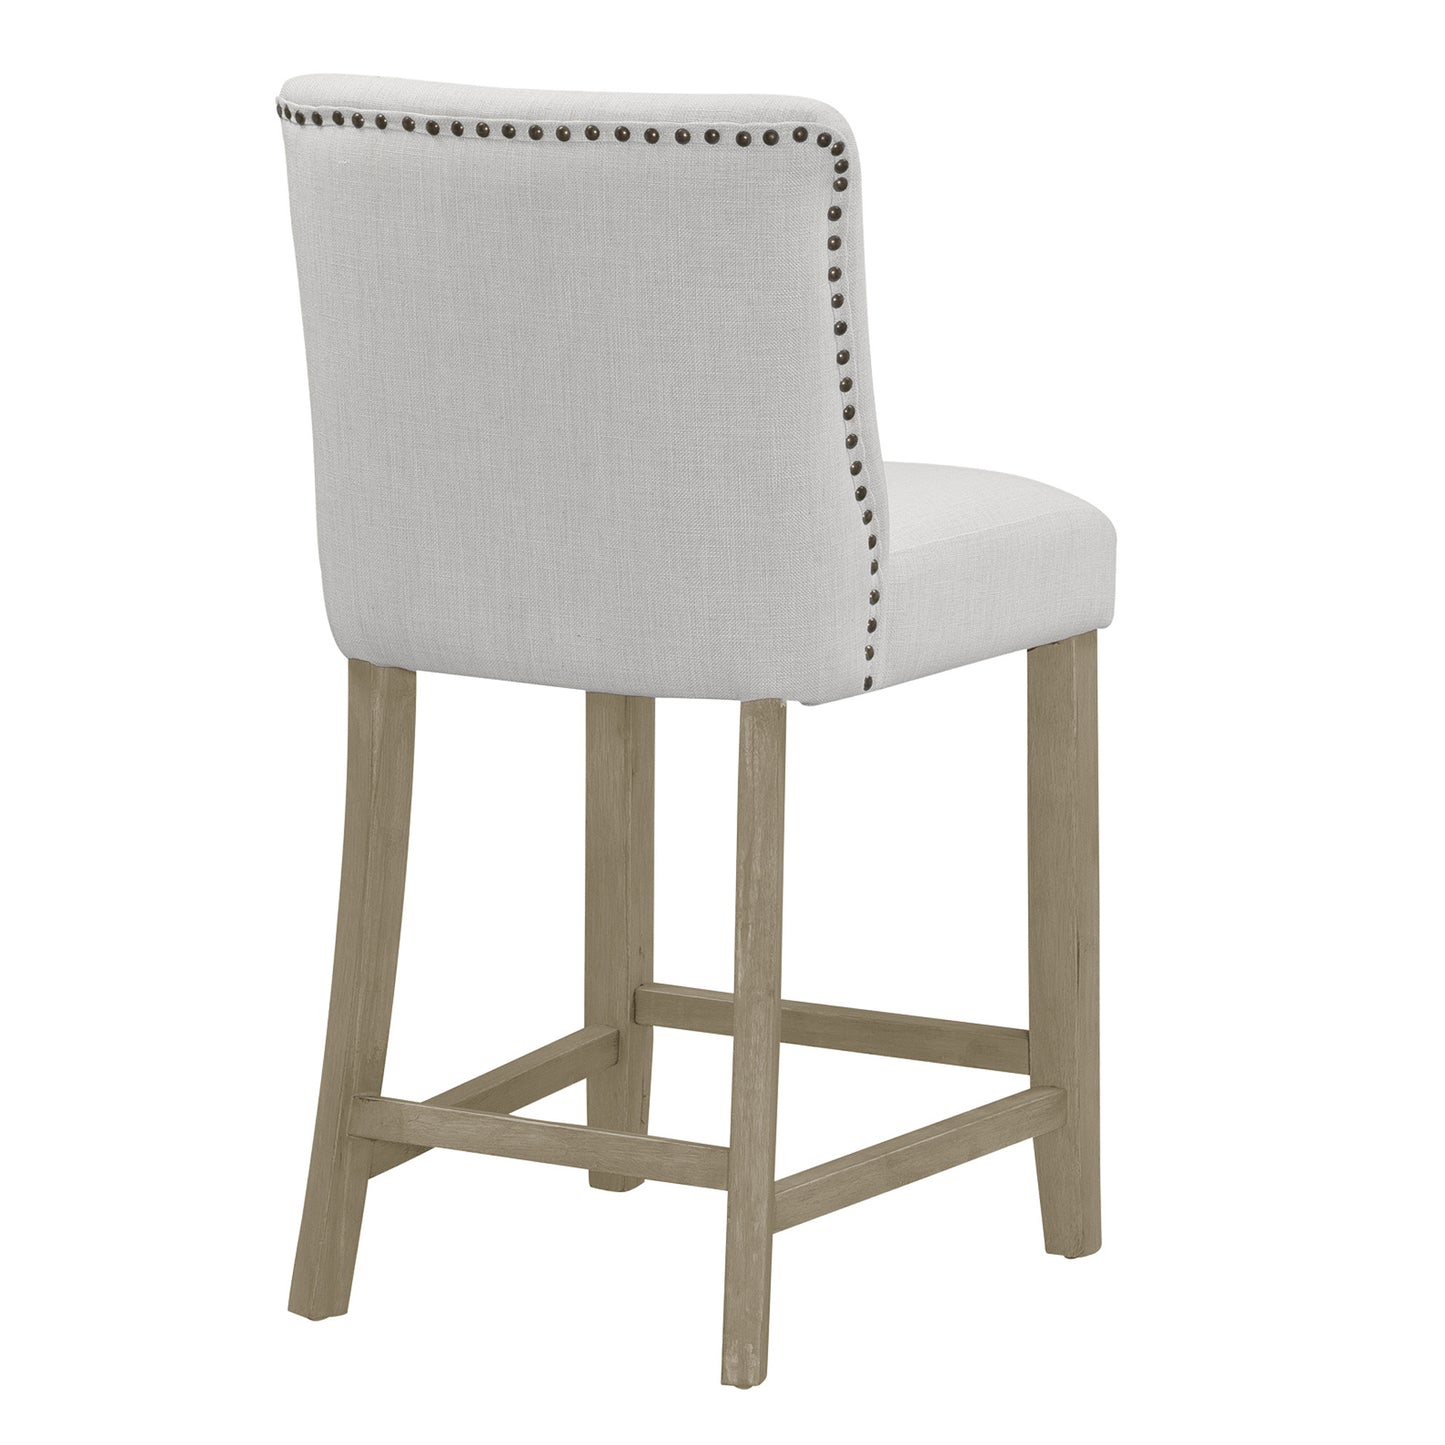 Set of 2 Aleco Beige Fabric Counter Stool with Metal Nail Head Accents